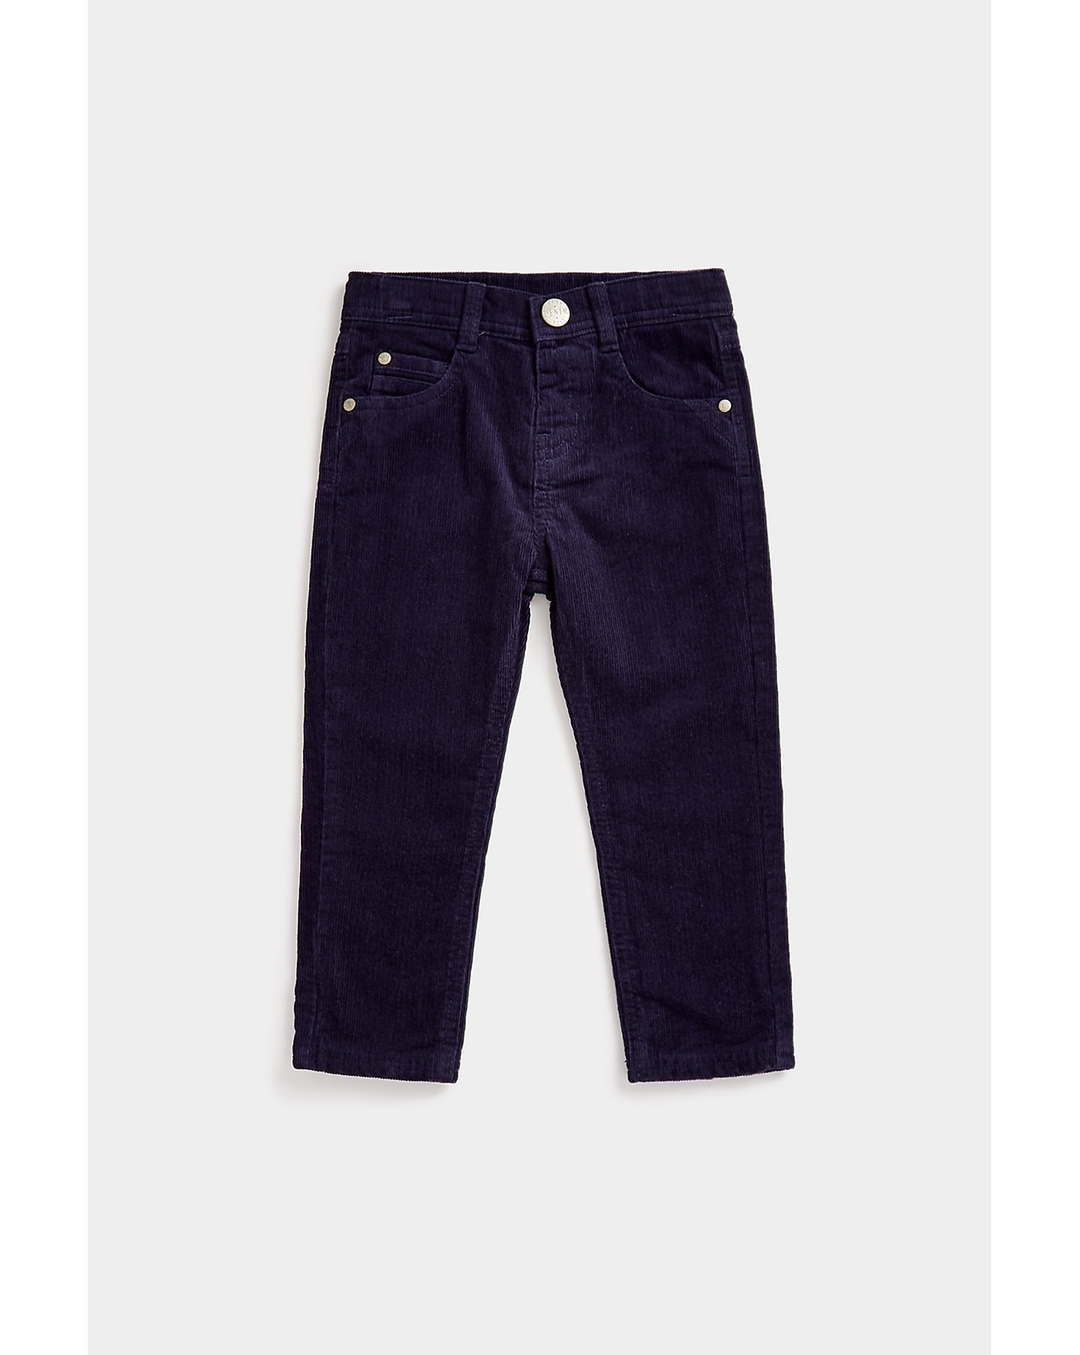 Chiswick Cord Trousers  Navy  Boden UK